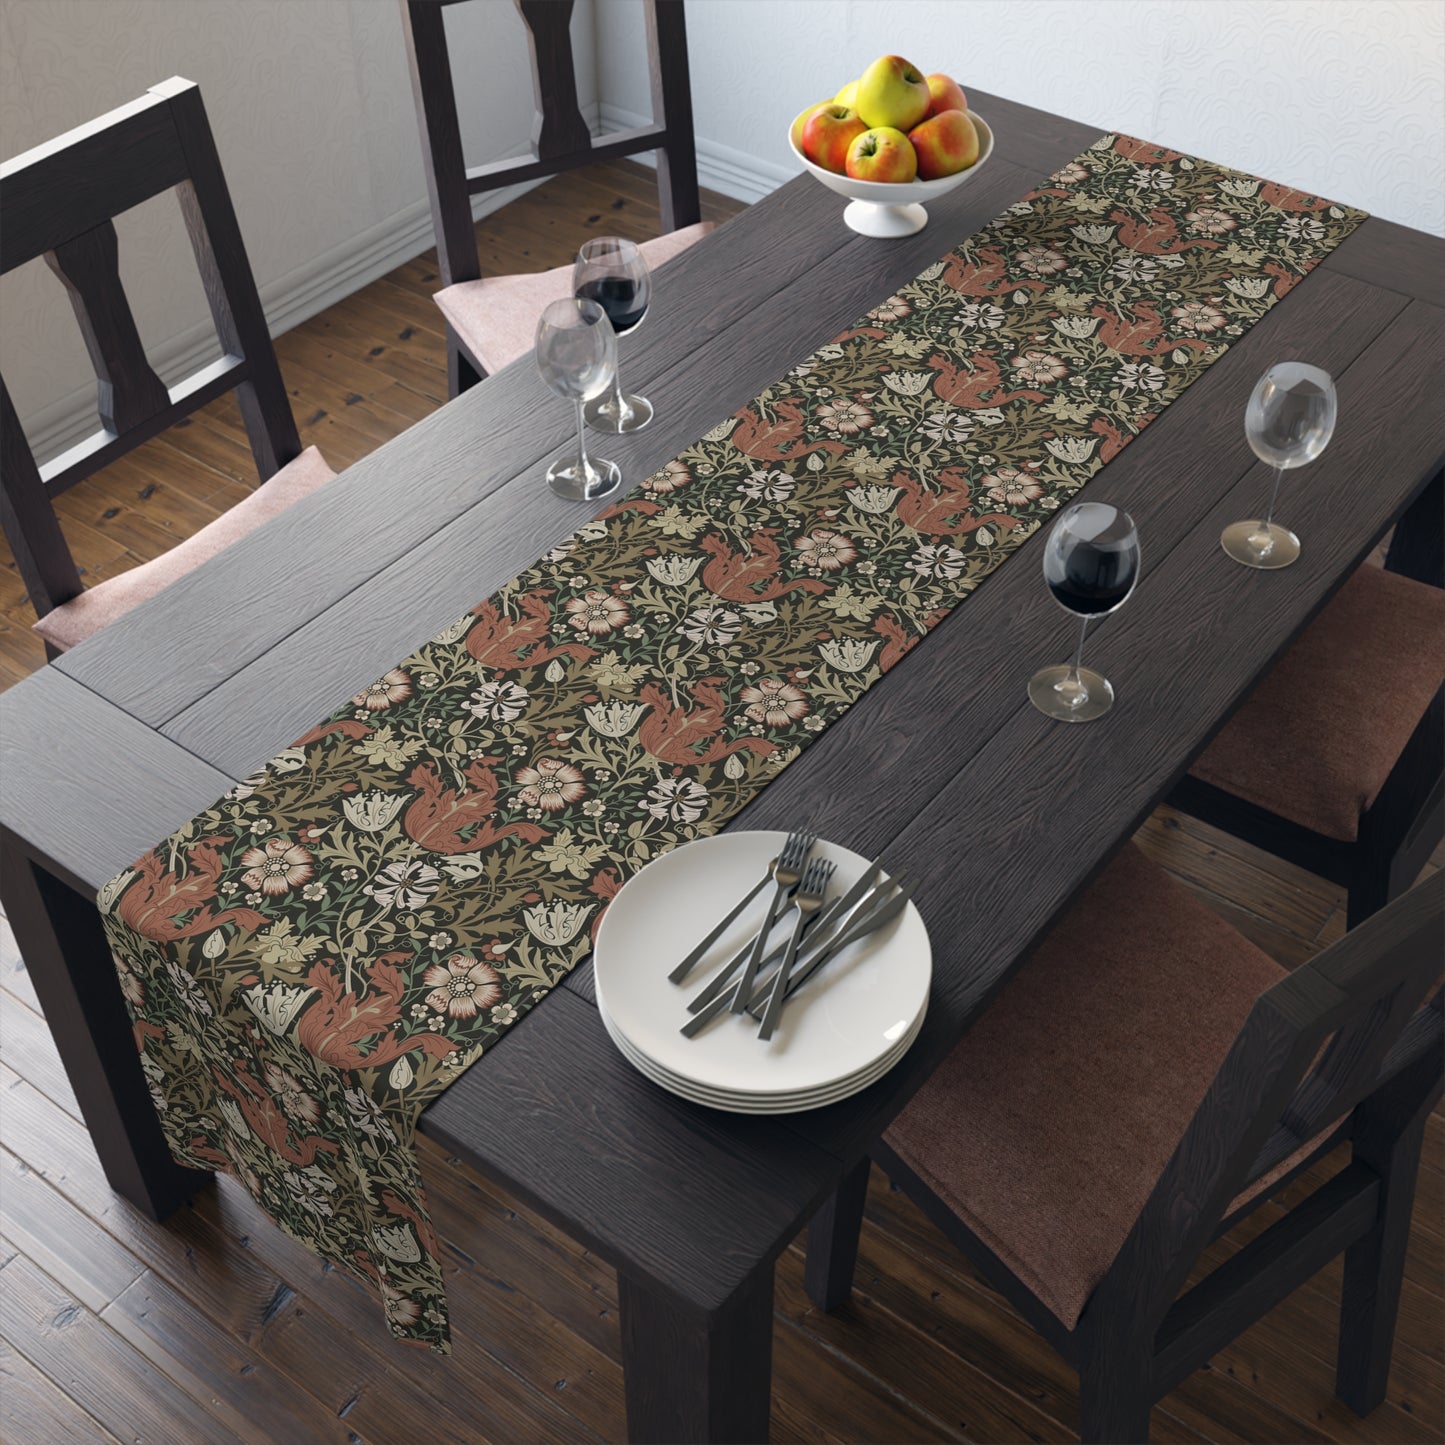 william-morris-co-table-runner-compton-collection-moor-cottage-9